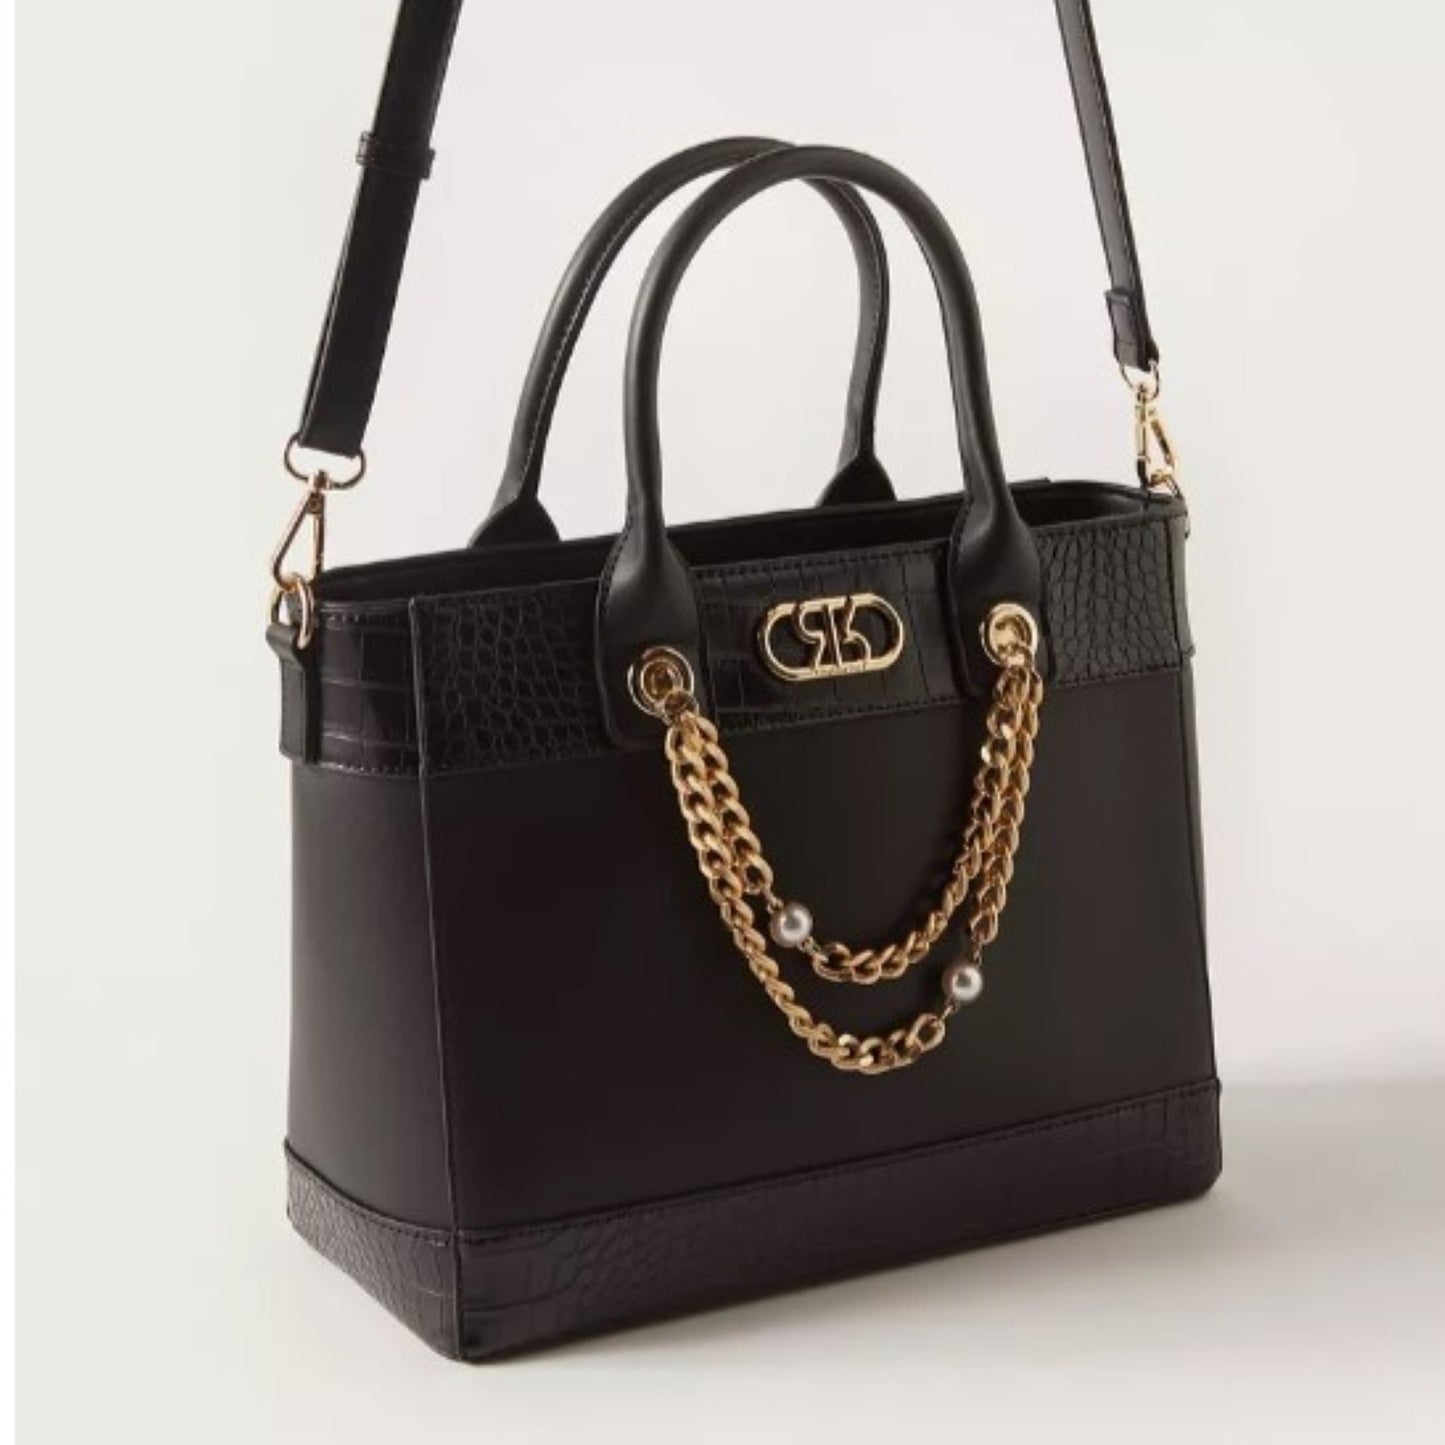 Black Textured Top Handle Satchel Tote Bag with Chain Accent